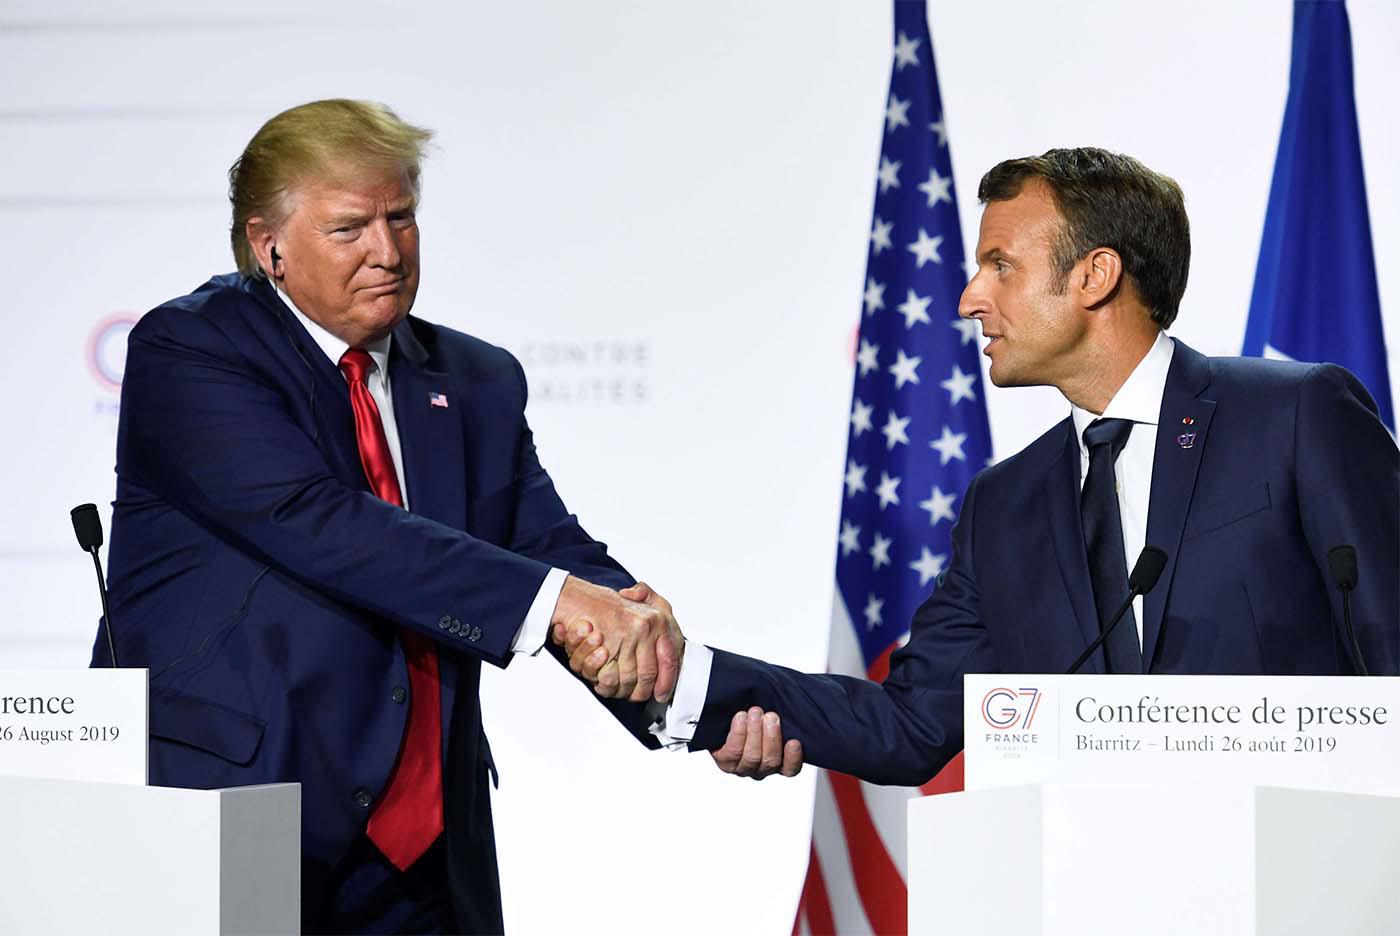 Macron’s proposed deal may be a bridge too far for both the United States and Iran